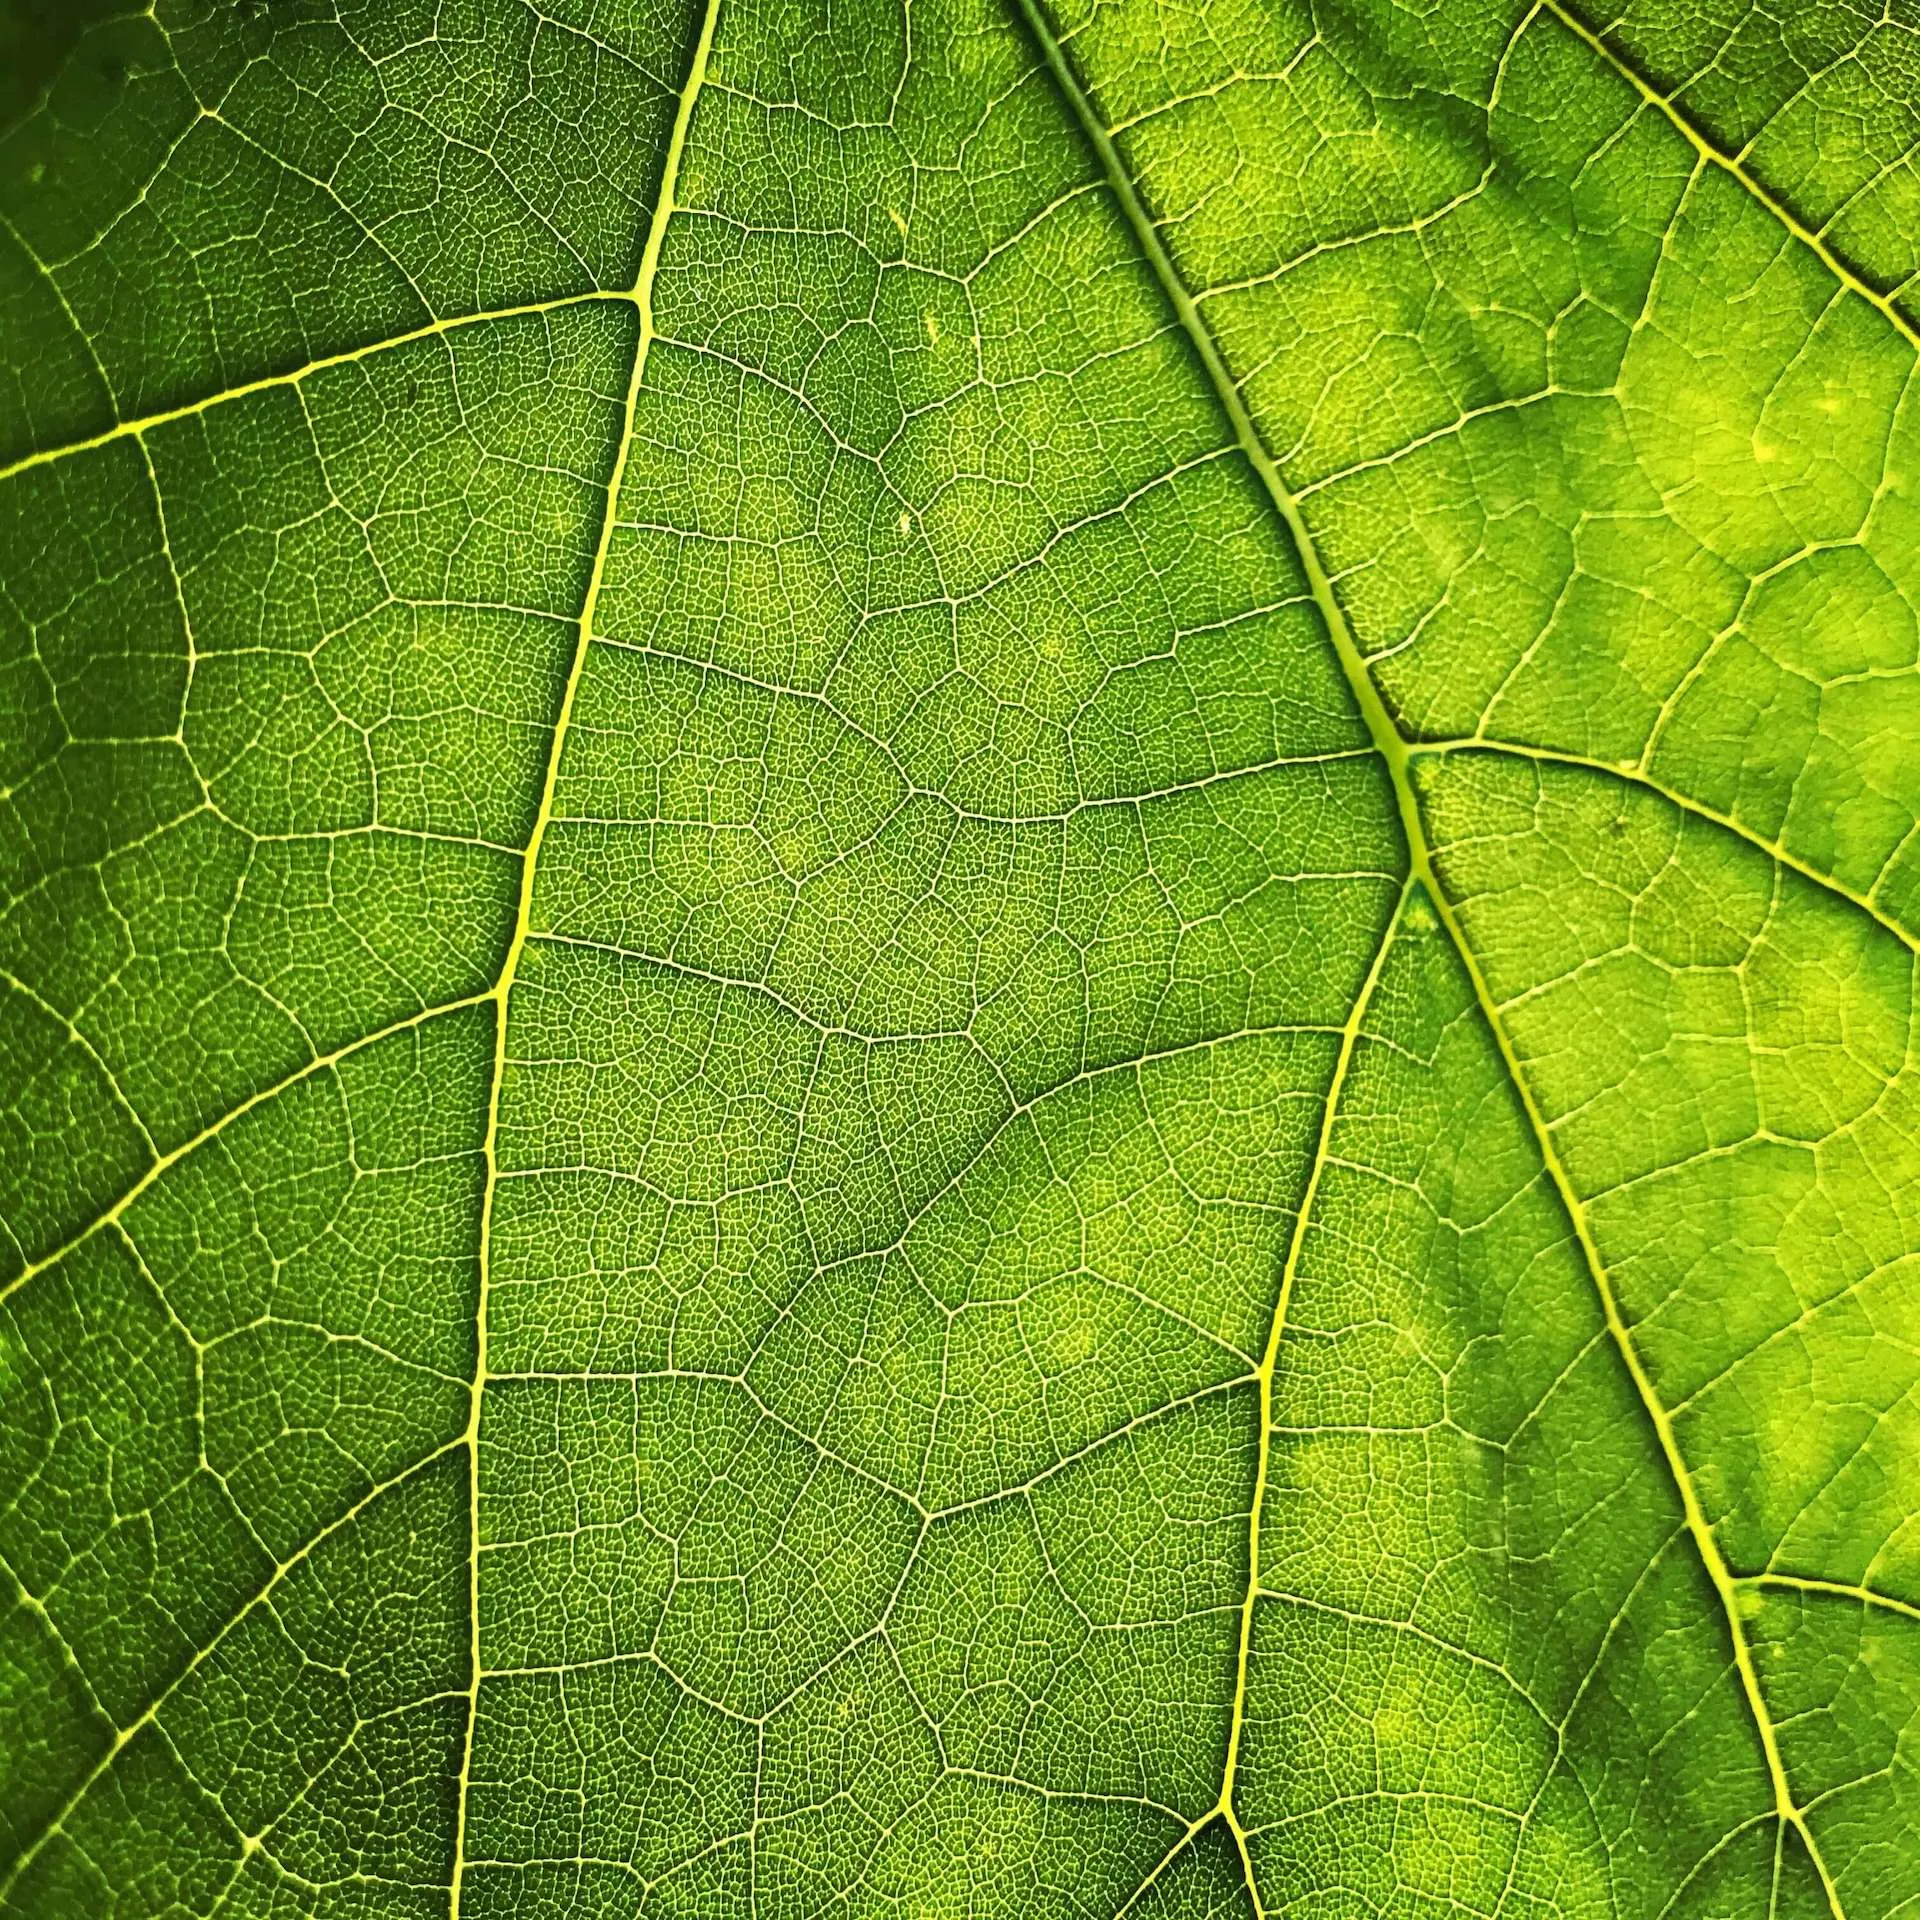 The veins of a green leaf